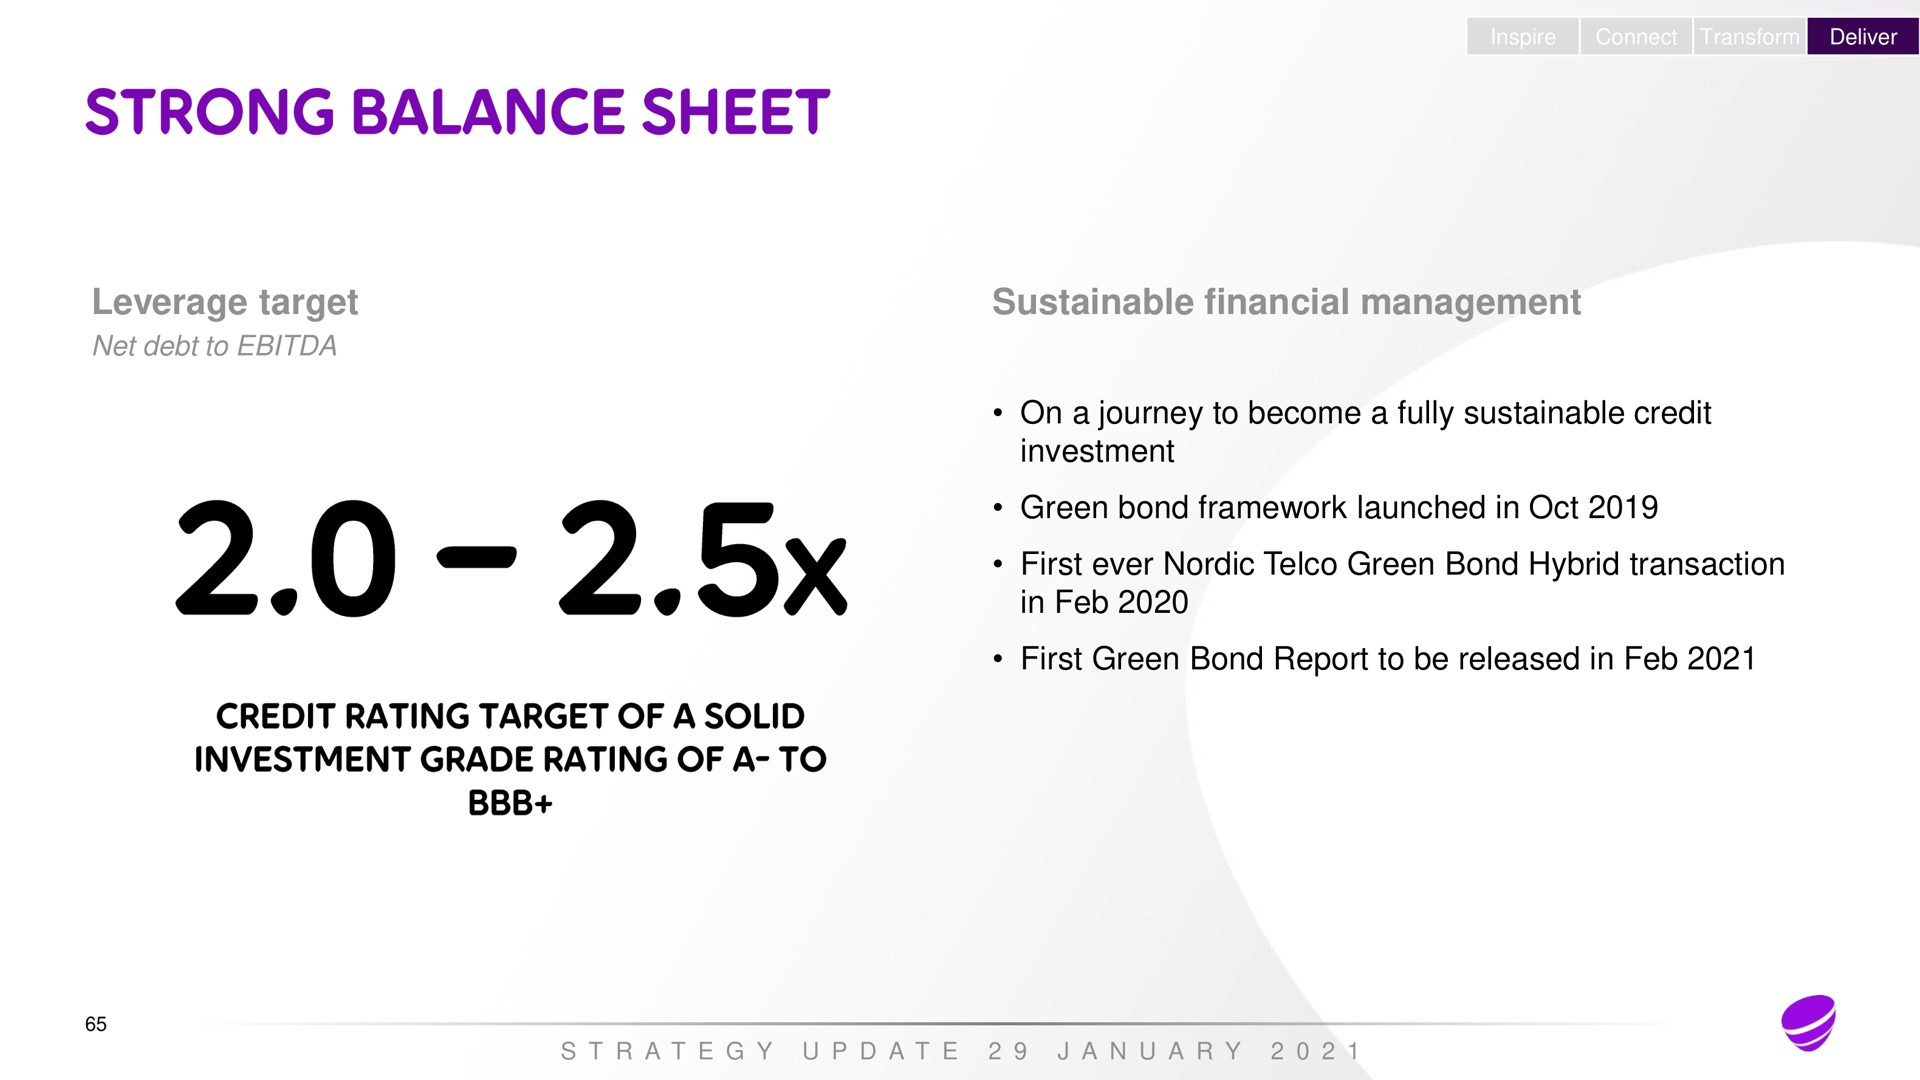 leverage target net debt to inspire connect transform deliver sustainable financial management on a journey to become a fully sustainable credit investment green bond framework launched in first ever green bond hybrid transaction in first green bond report to be released in a a a a strong balance sheet | Telia Company